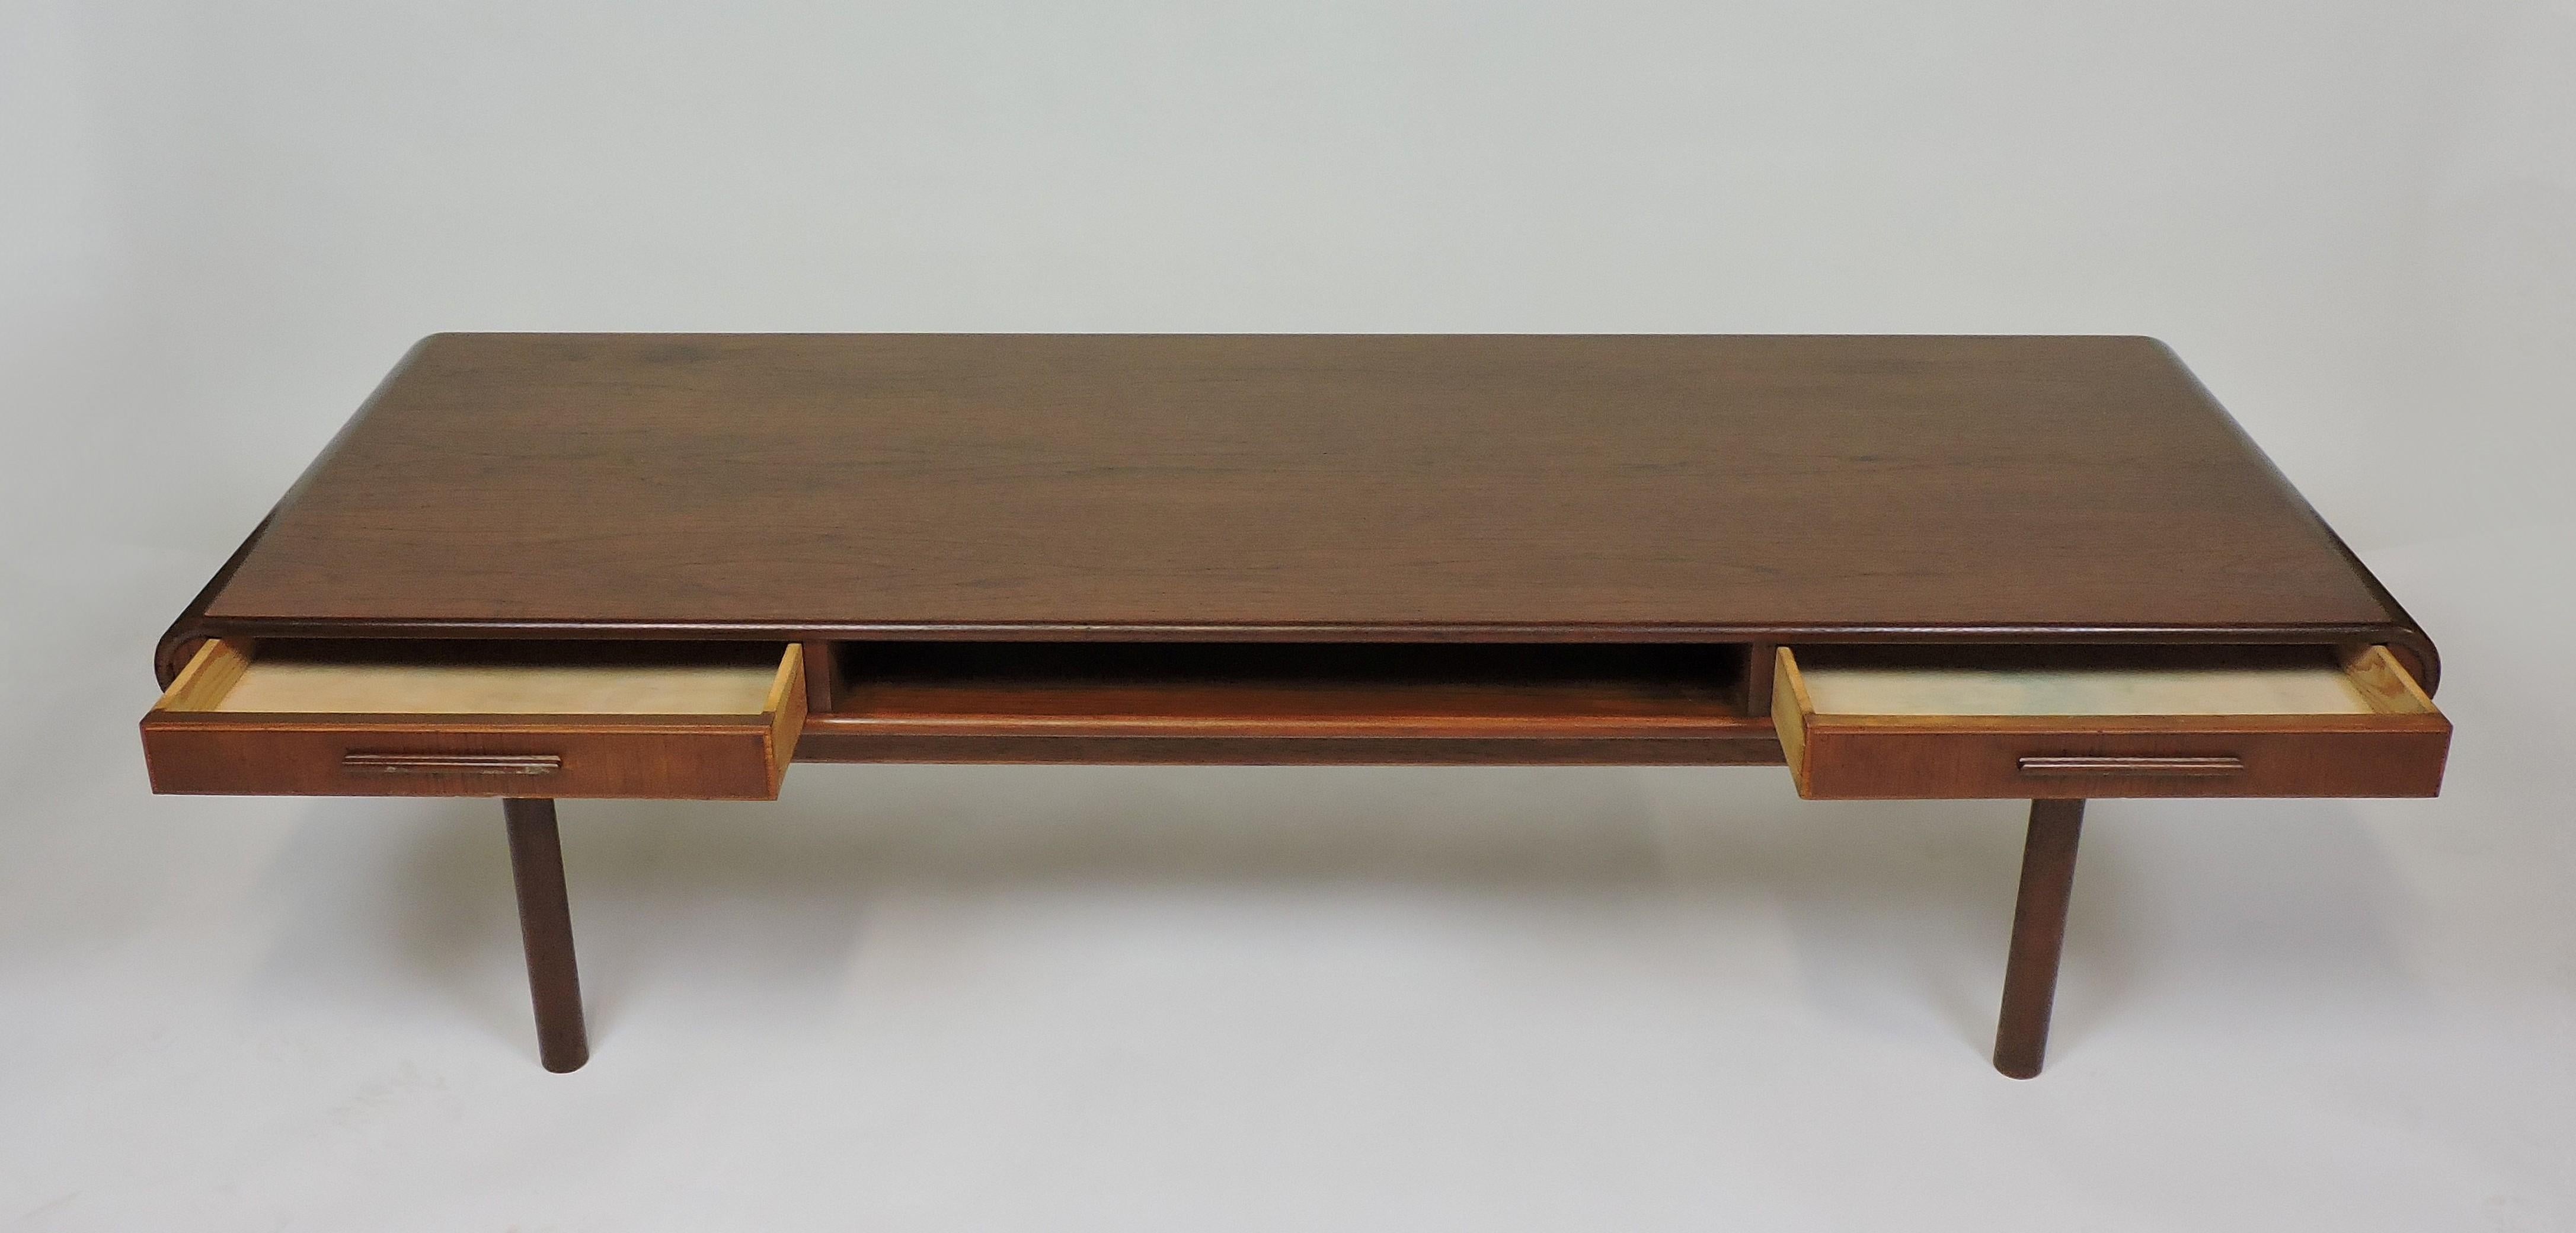 Handsome and unique Danish teak coffee table made in Denmark by Toften Mobelfabrik. This table has an enclosed shelf in the center flanked by two drawers that can be opened from either side. Clean lines and a rounded edge give this table a timeless